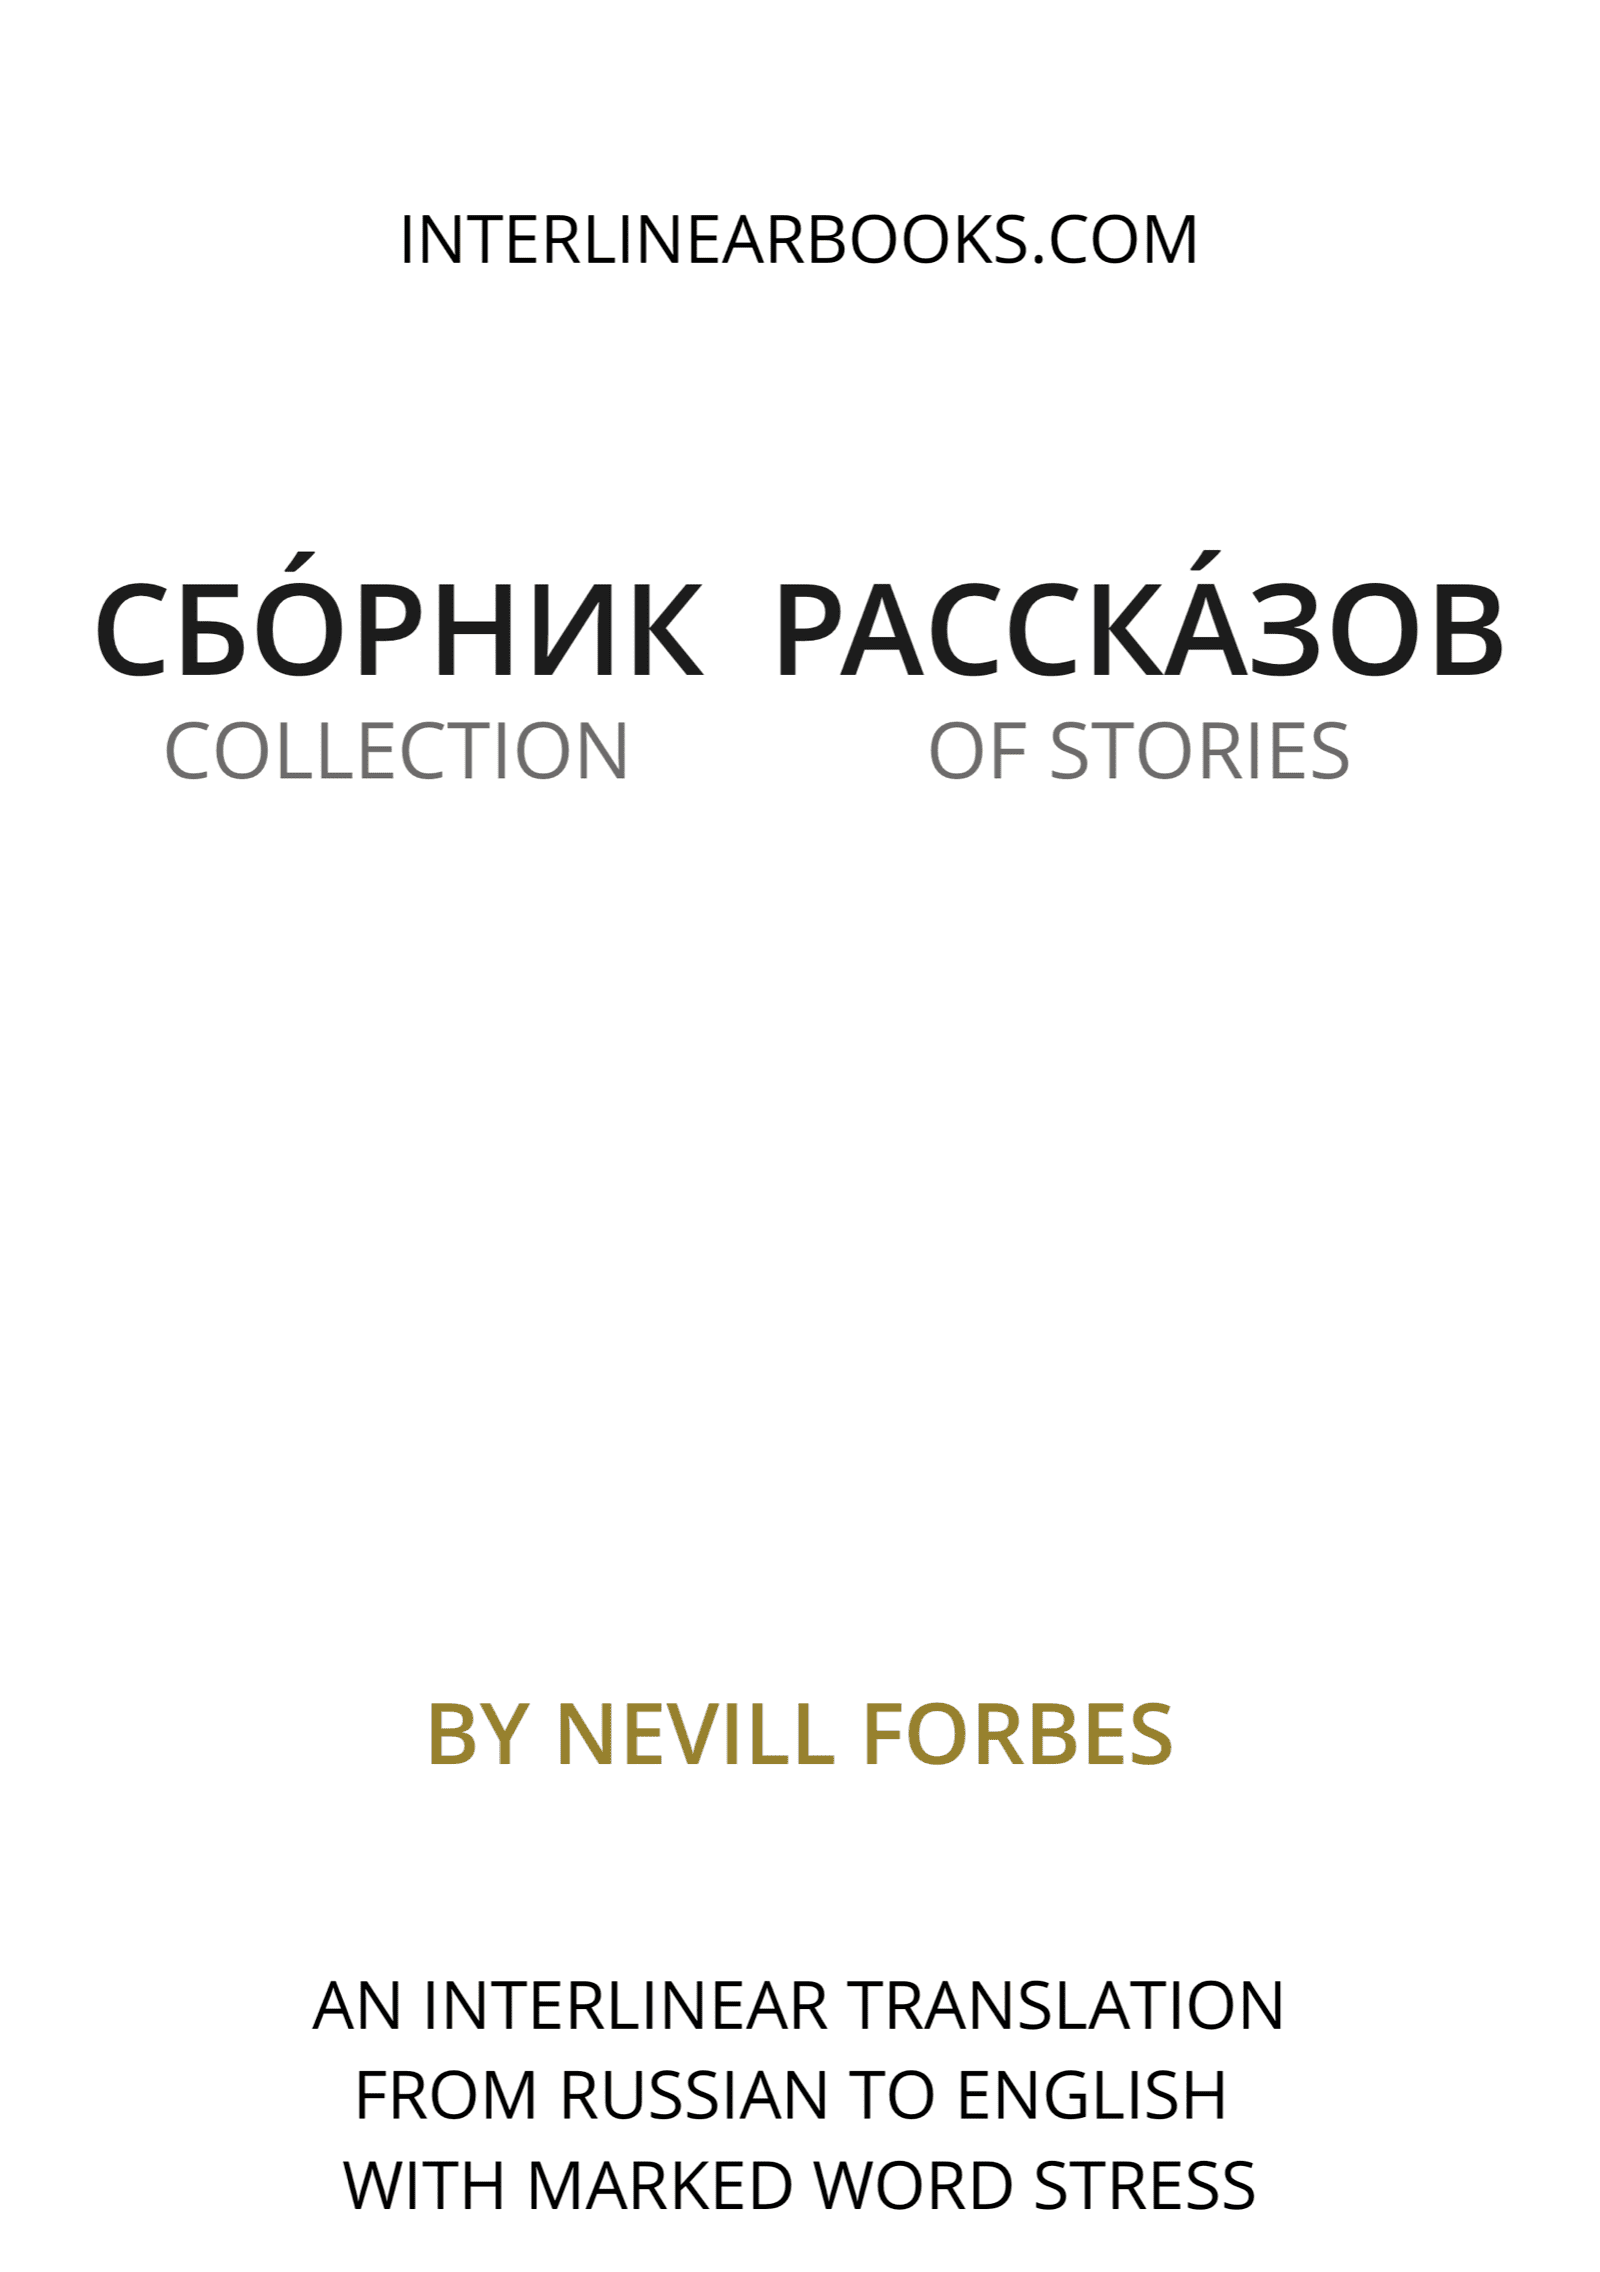 Russian book: Сборник рассказов / Collection of Stories